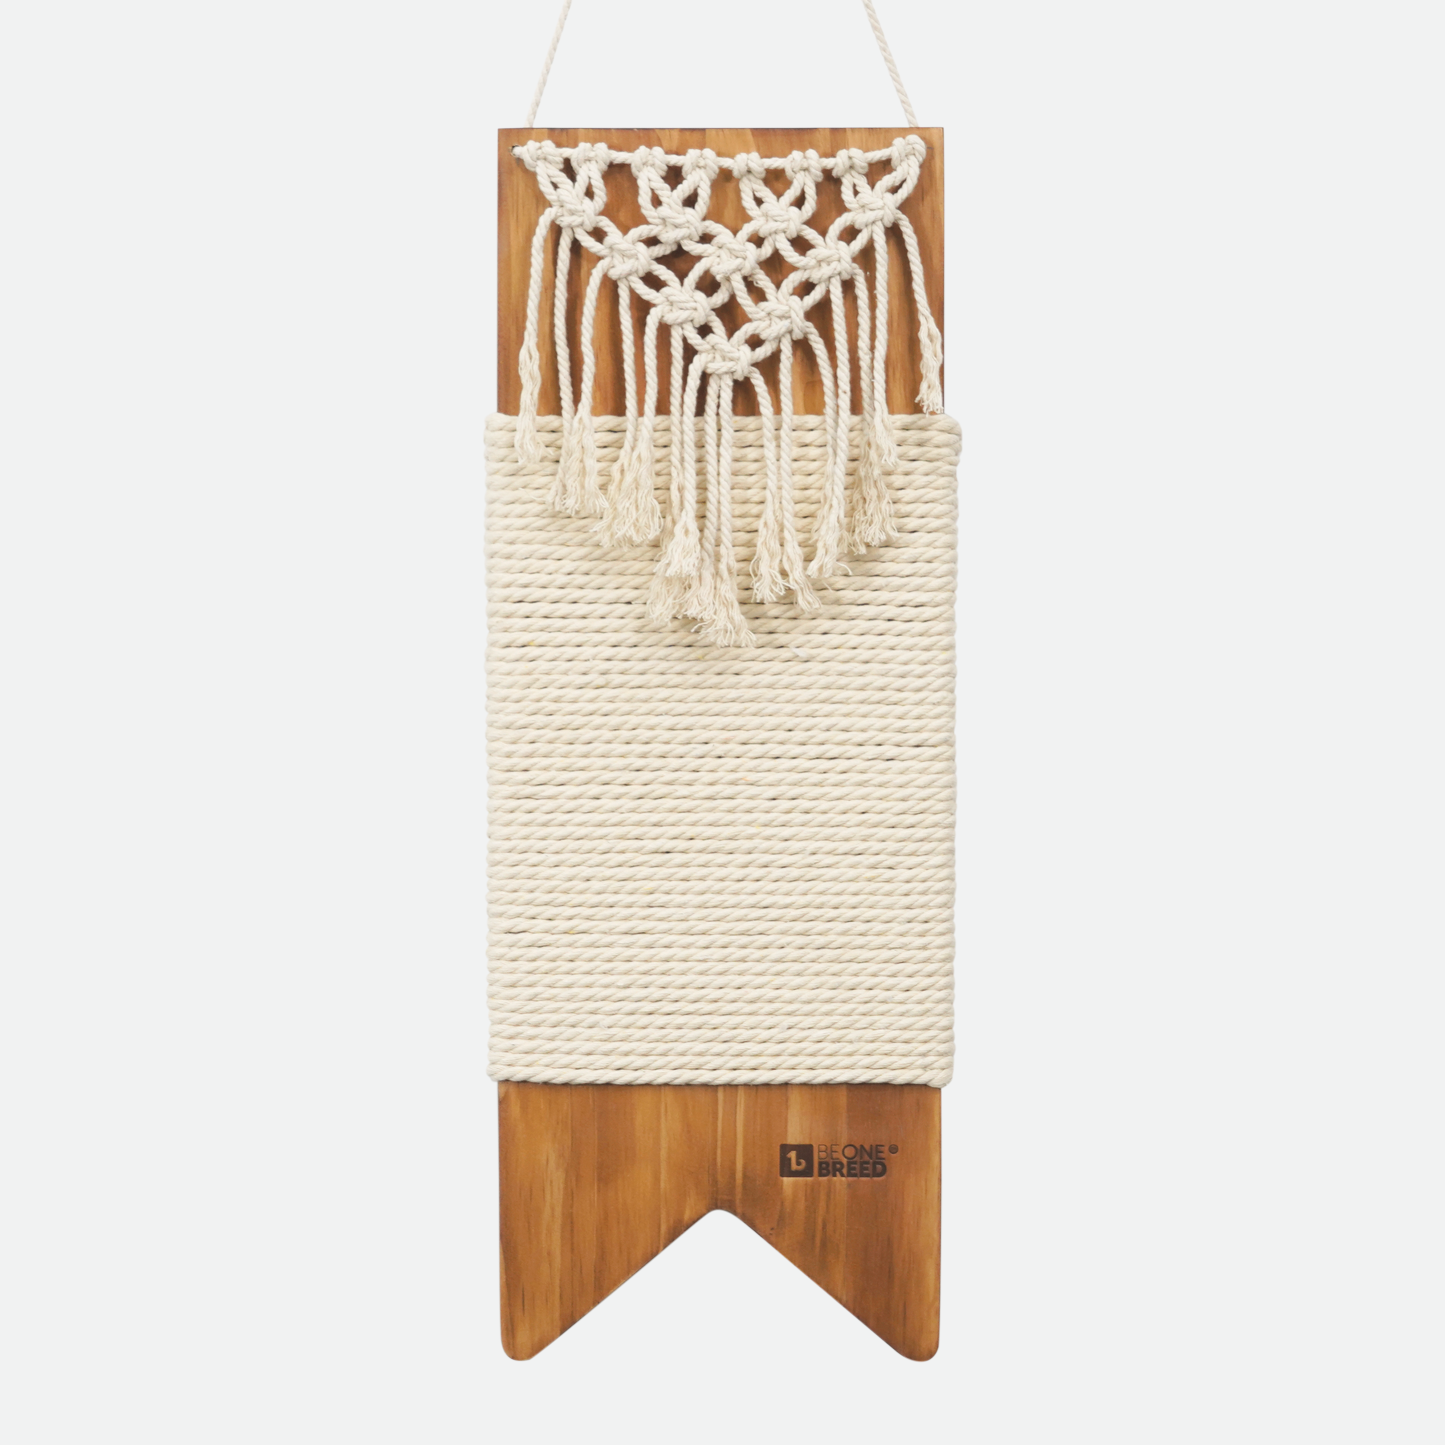 Cotton rope cat scratcher to hang, wood